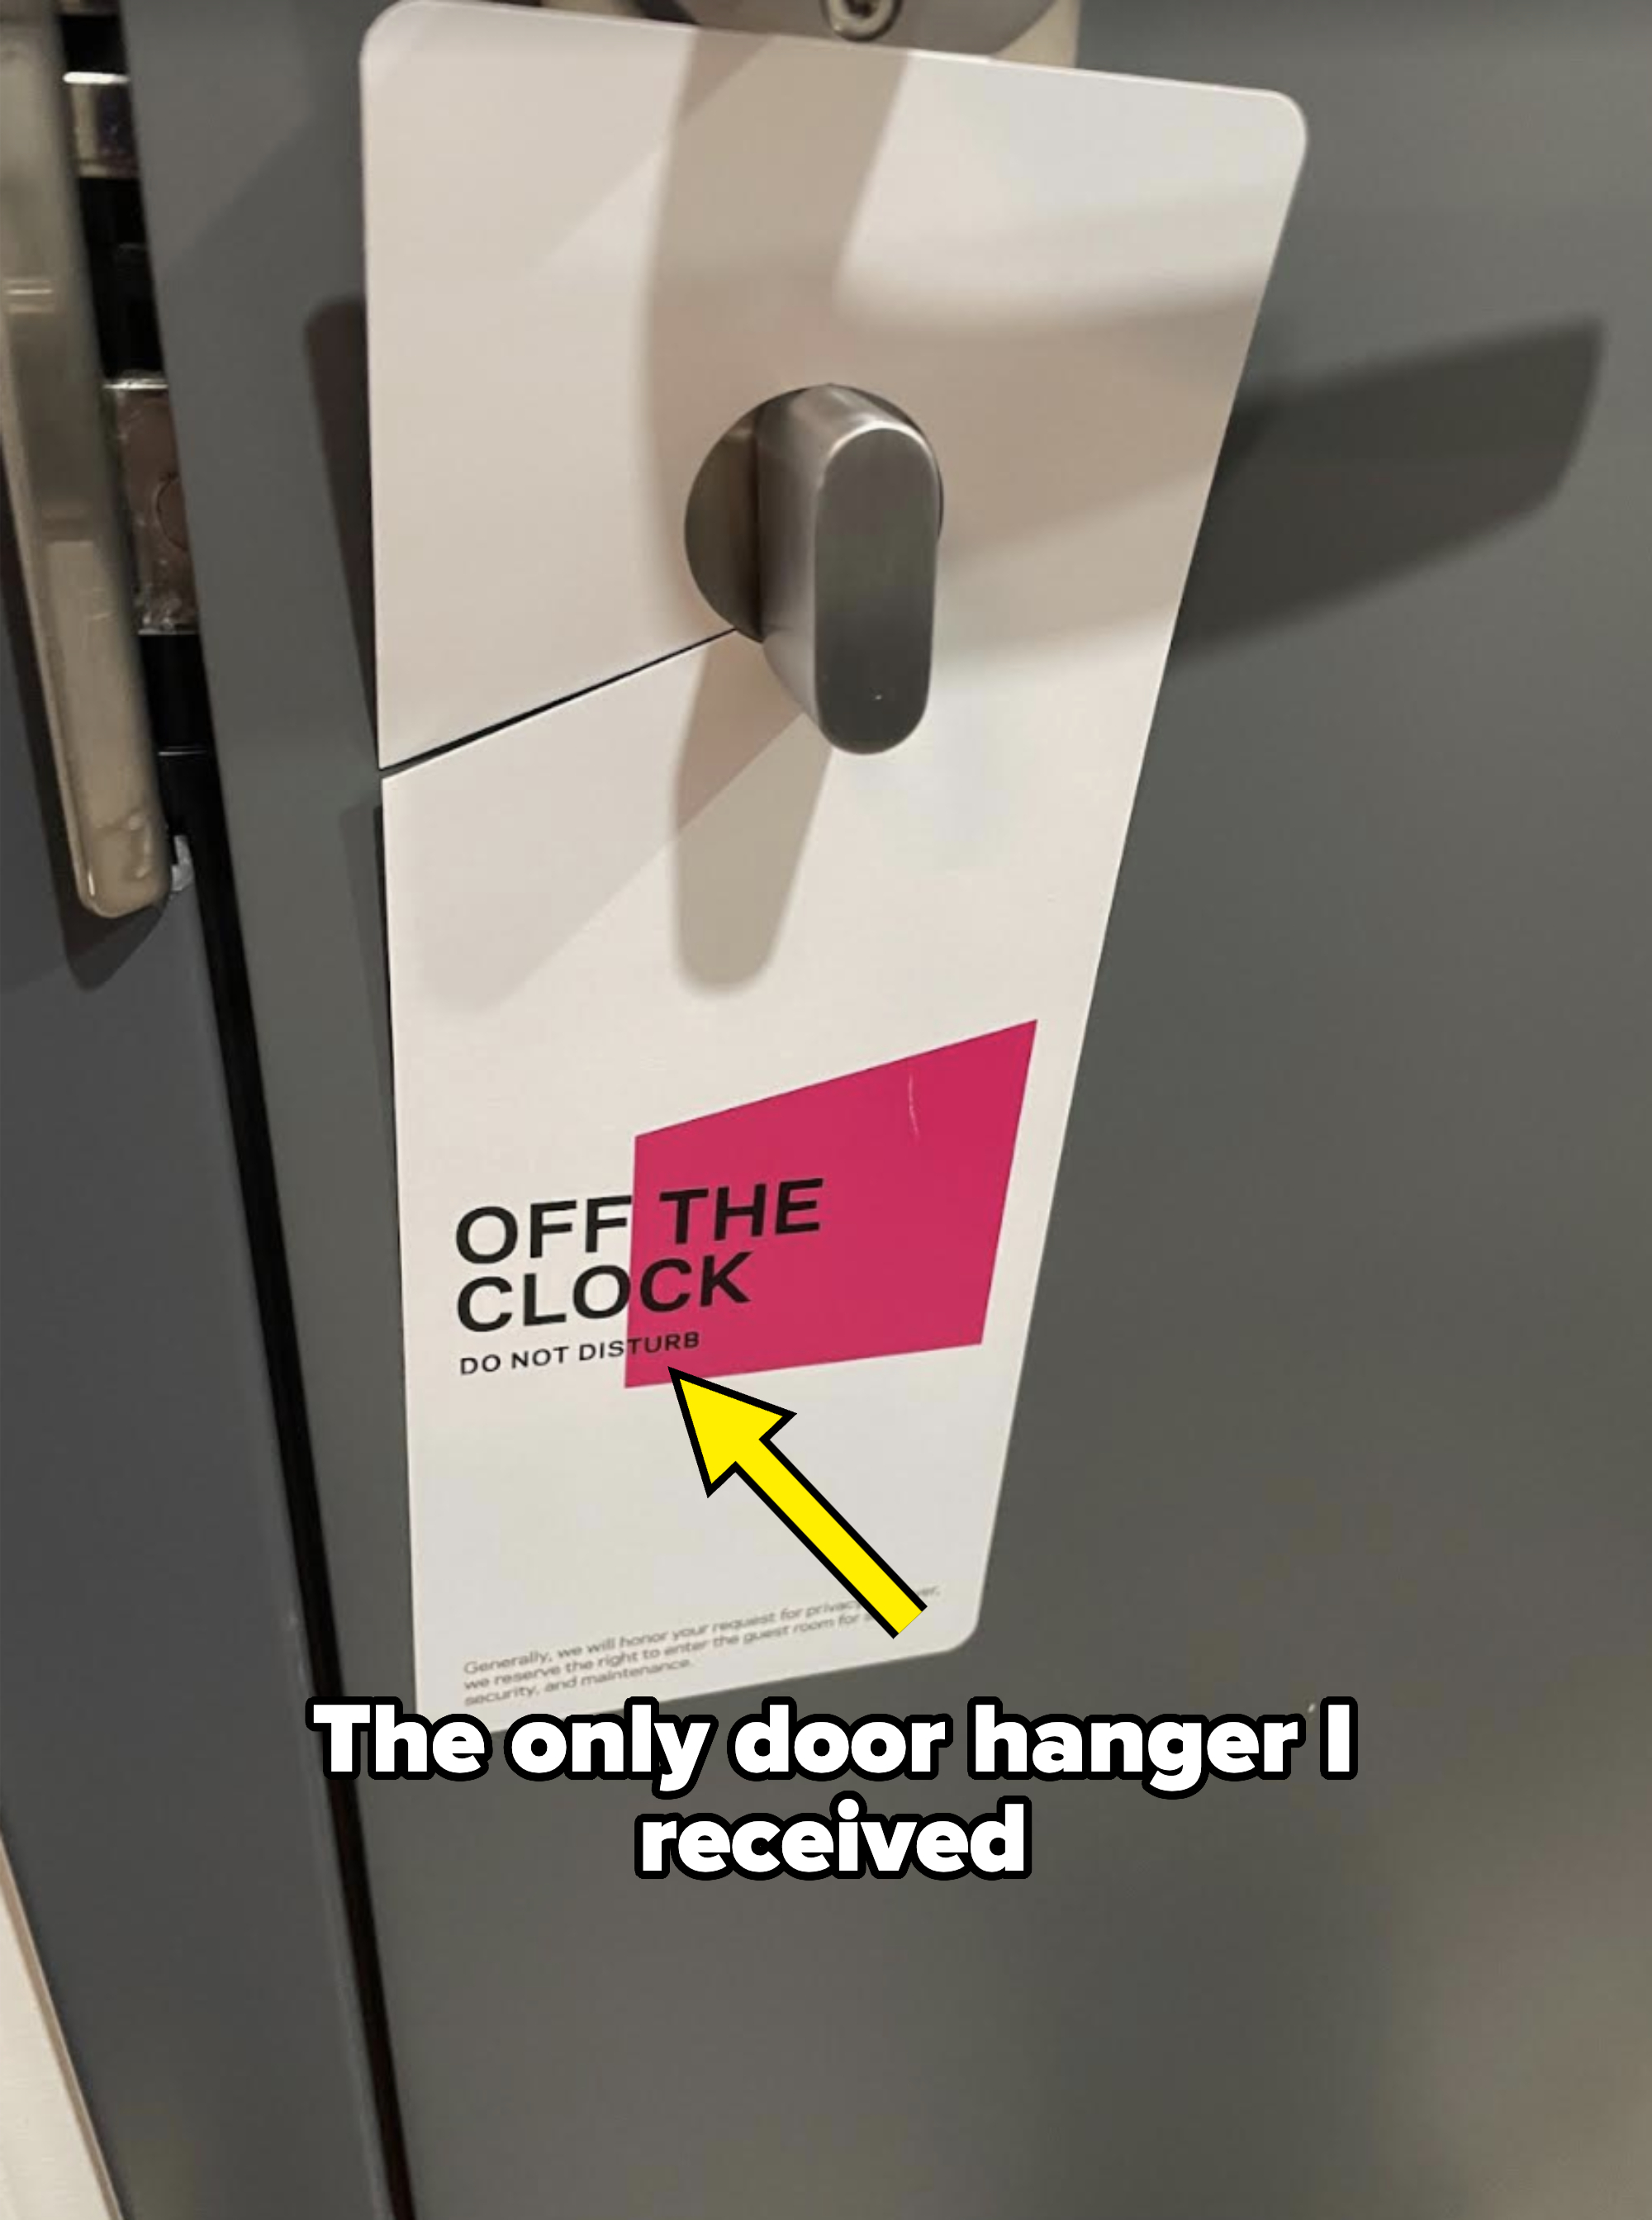 Door hanger on a handle reads &#x27;OFF THE CLOCK&#x27; indicating &#x27;Do Not Disturb&#x27; at a travel accommodation